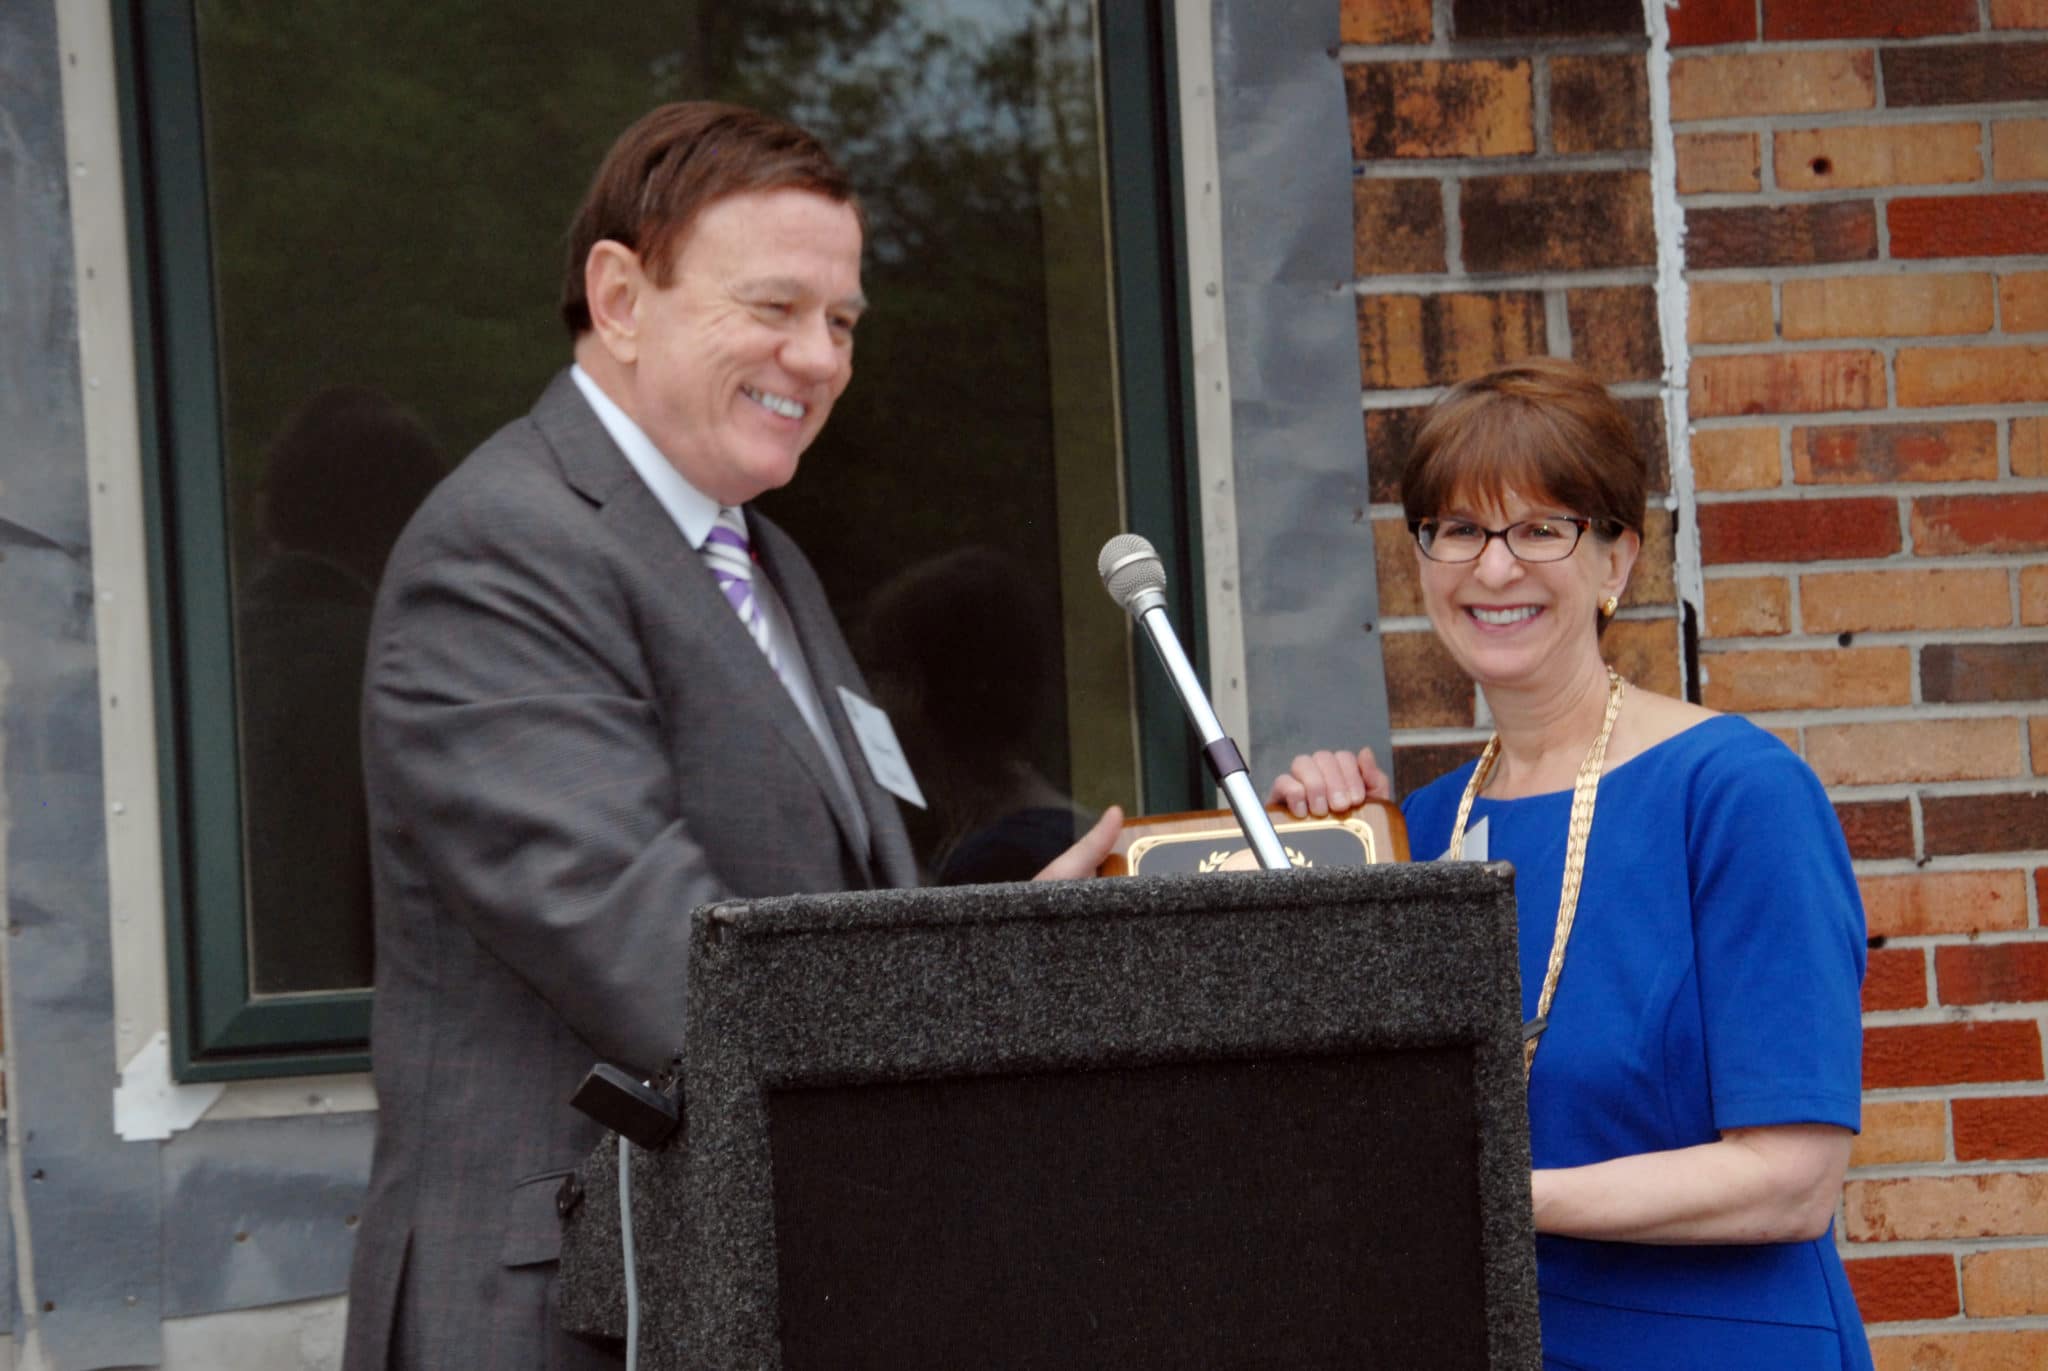 May 15, 2015, Elaine Katz, senior vice president of grants and communications for the Kessler Foundation, received the Betty Pendler Award from Community Options Inc. at the Daily Plan It – Farber Rd – Ribbon Cutting ceremony.